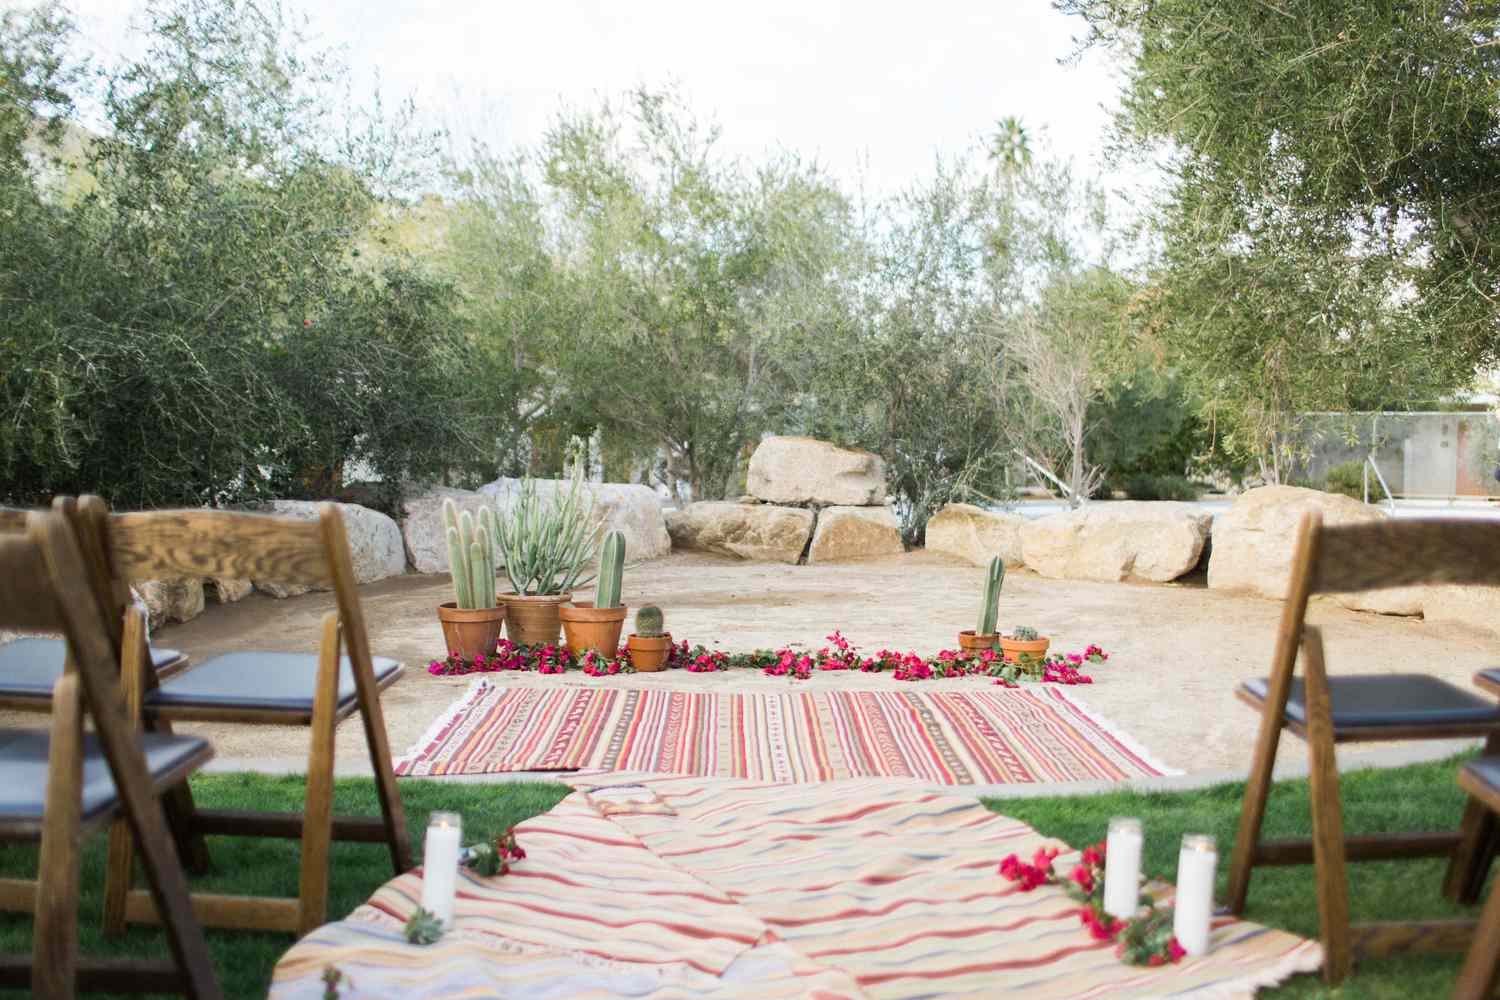 Wedding ceremony with rugs down the aisle and a rug with flowers and cacti at the end